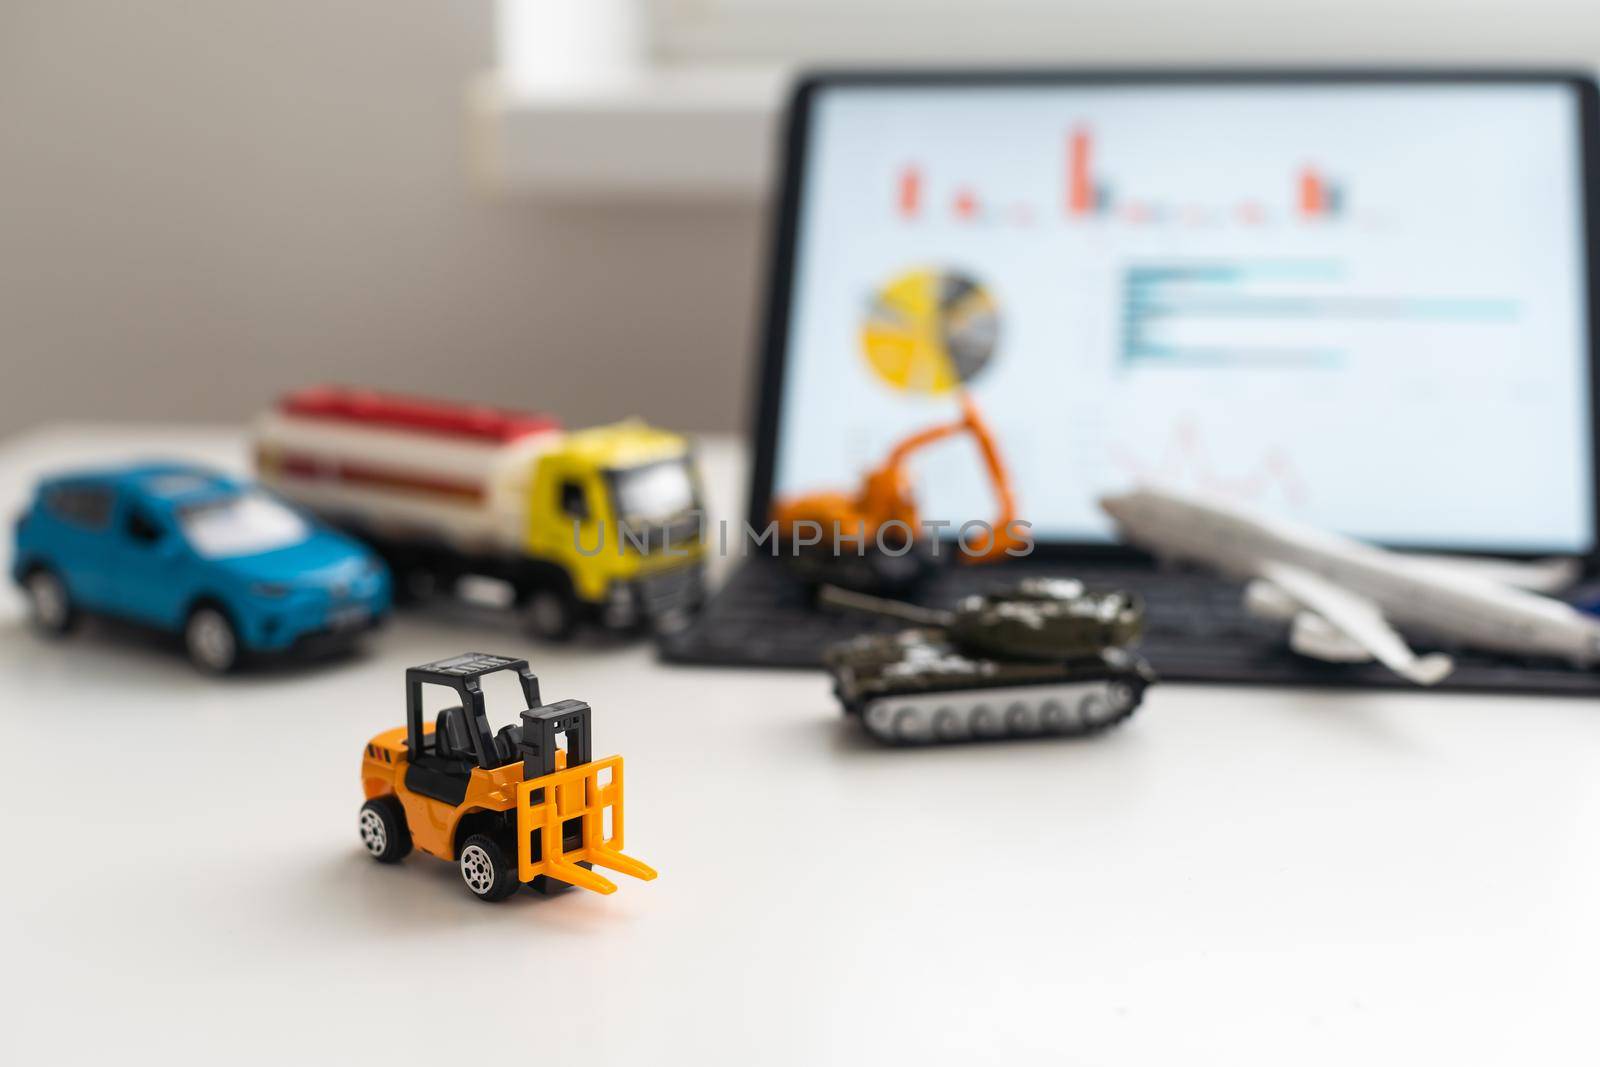 Tablet, a set of toy vehicles.